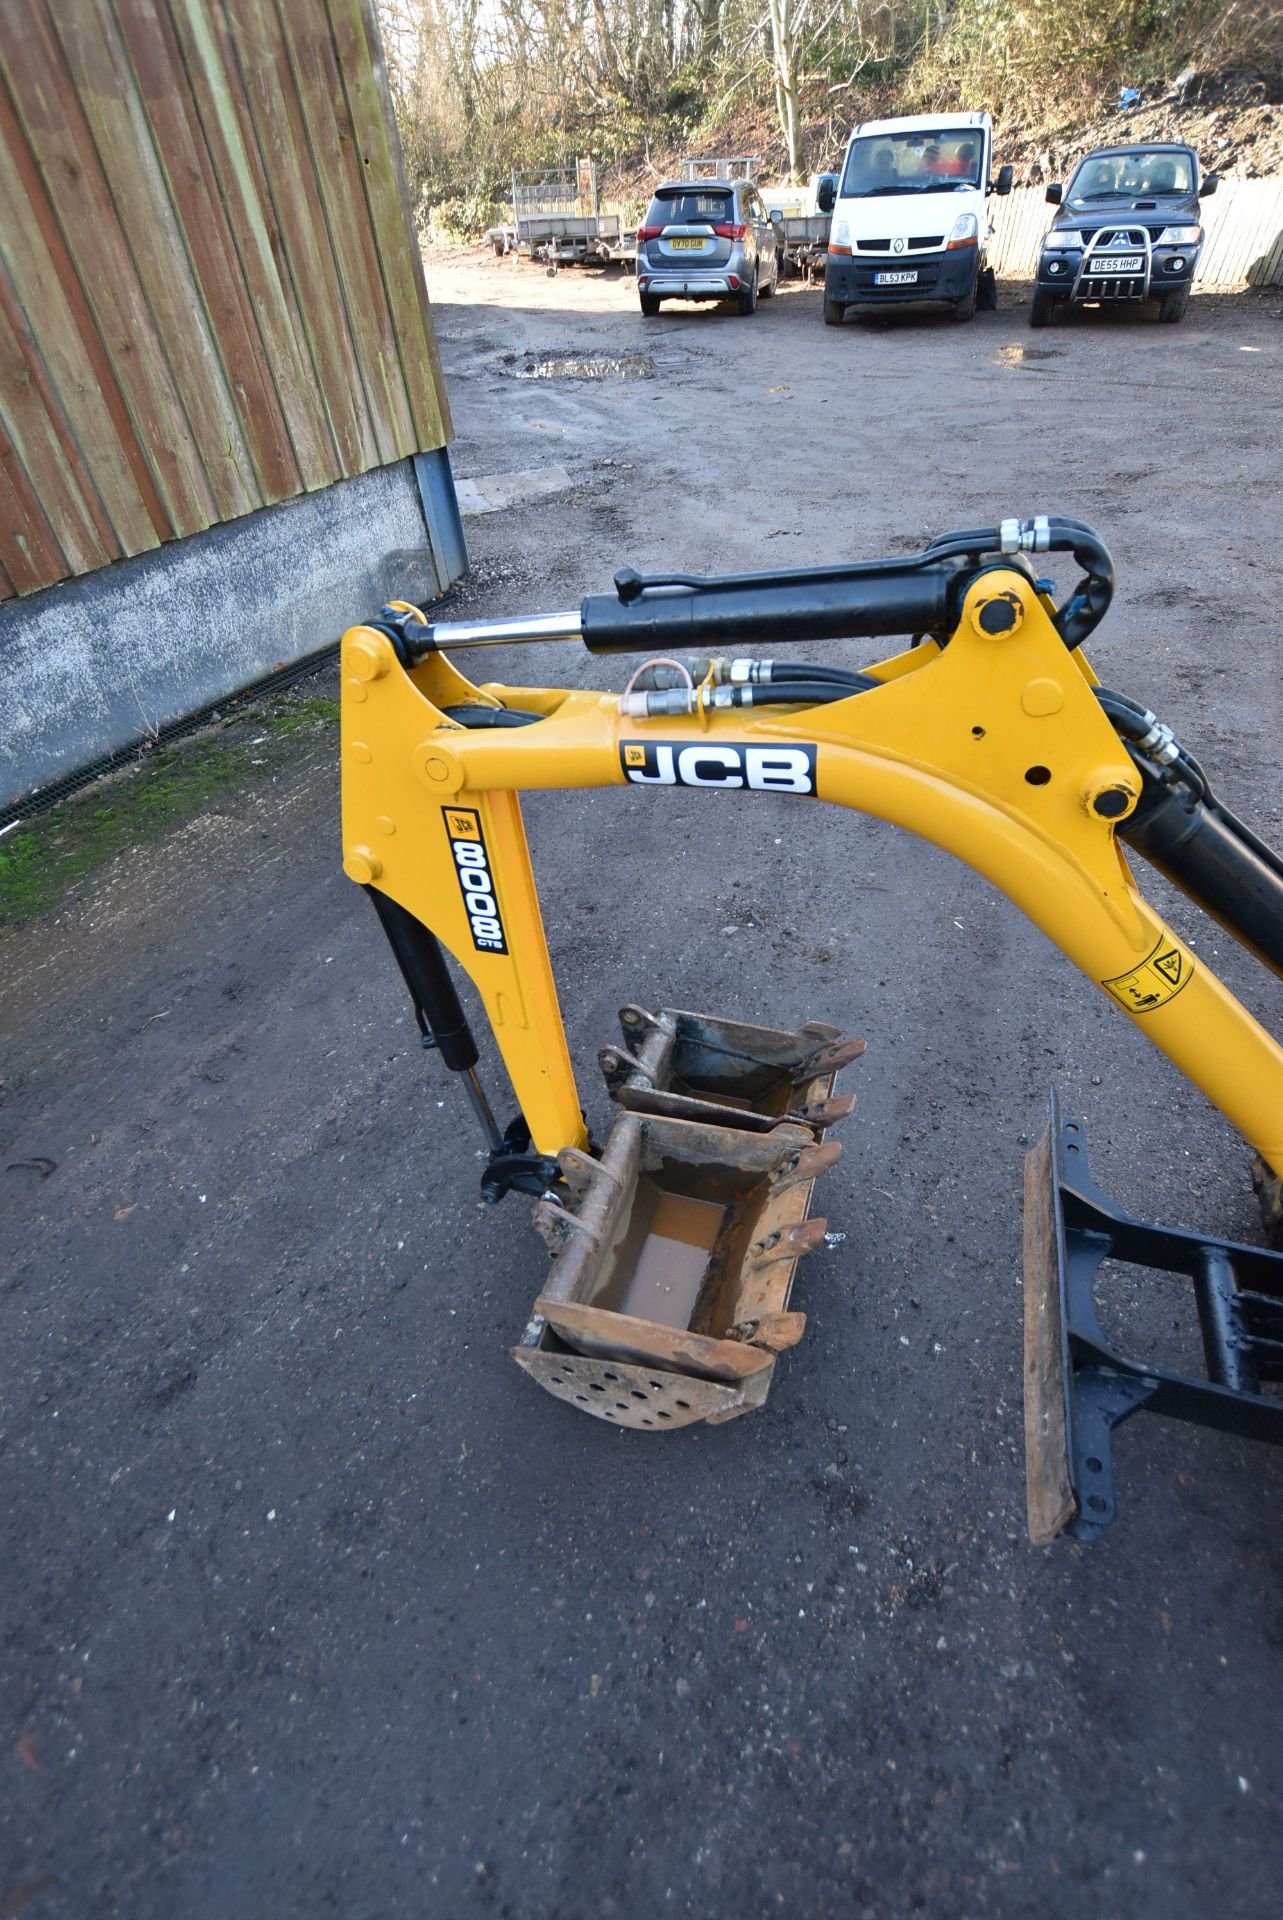 JCB 8008 CTS 950kg TRACKED COMPACT EXCAVATOR, serial no. 02410665, year of manufacture 2014, - Image 8 of 9